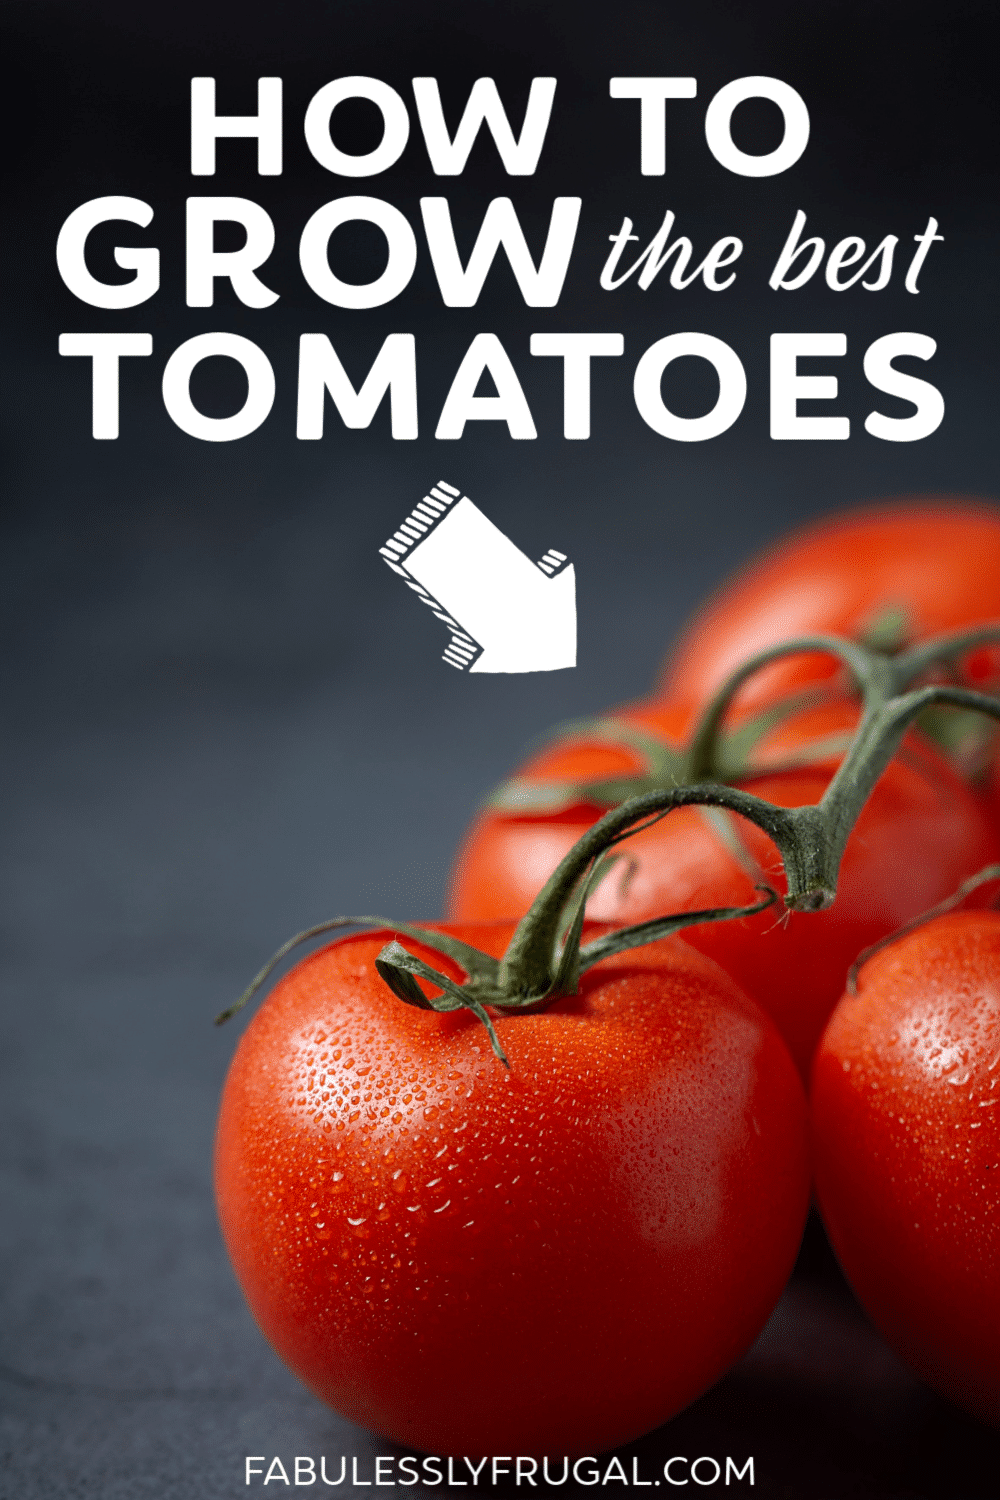 How to grow the best tomatoes